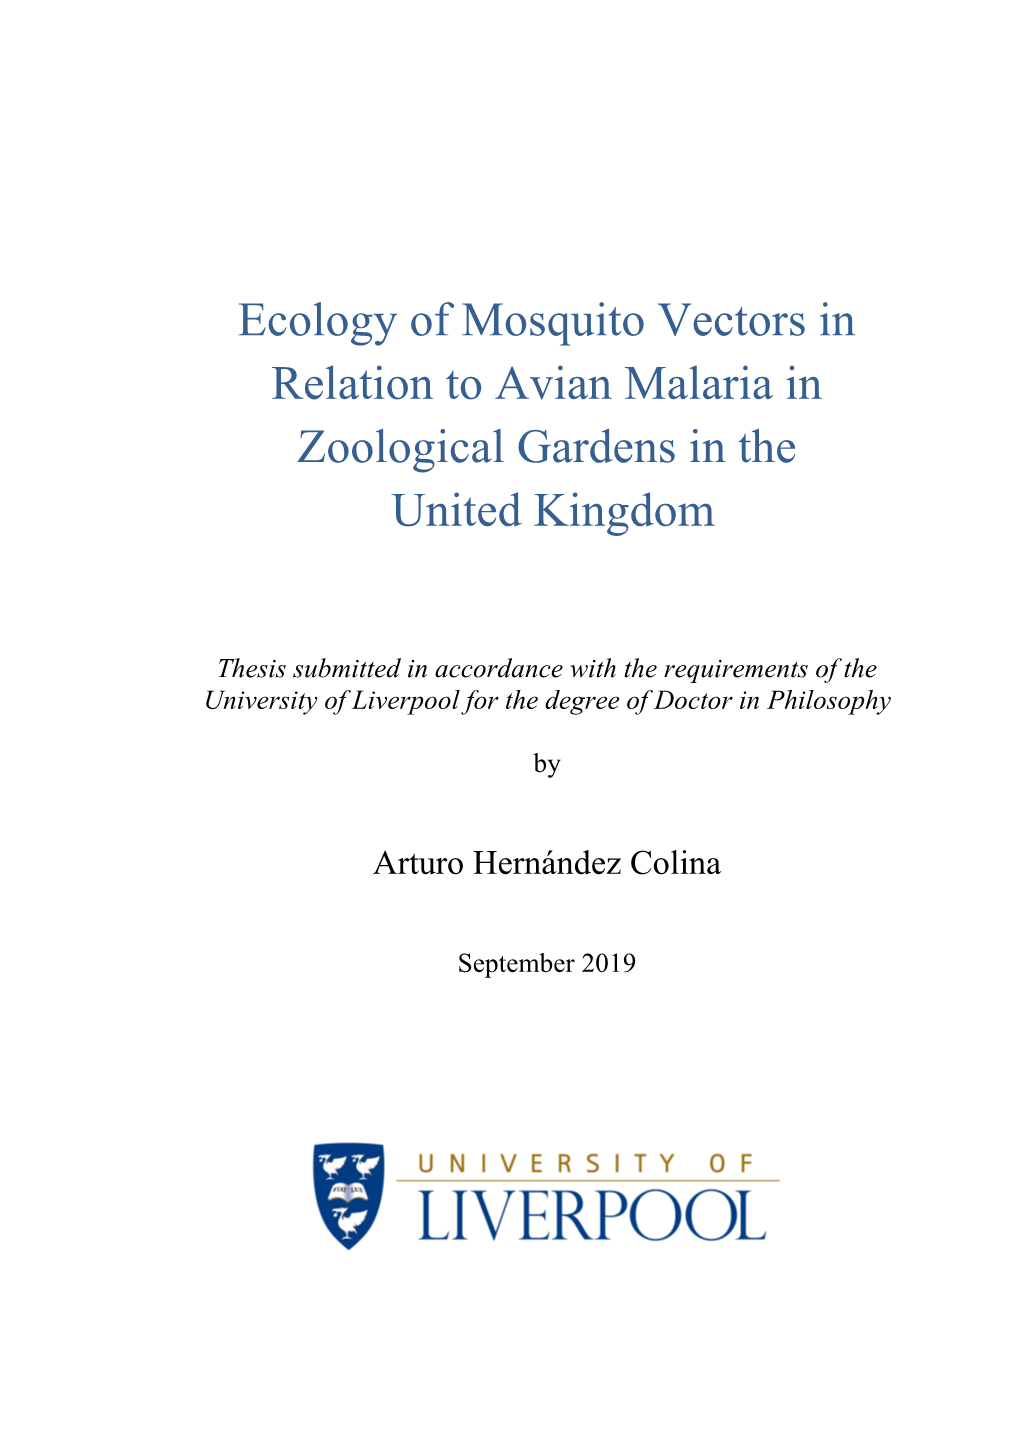 Ecology of Mosquito Vectors in Relation to Avian Malaria in Zoological Gardens in the United Kingdom